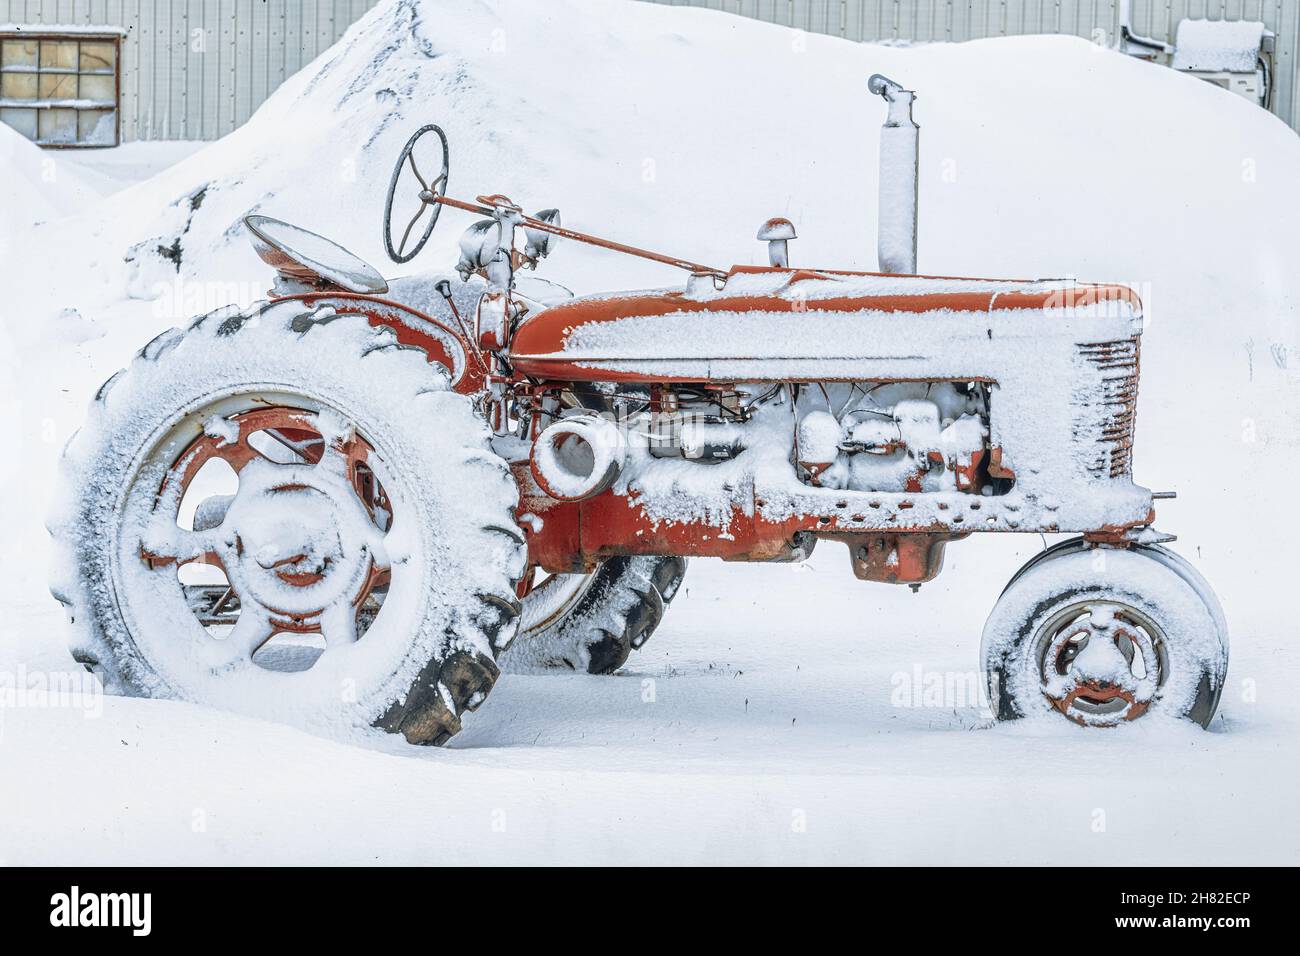 An old antique tractor covered in snow. Stock Photo